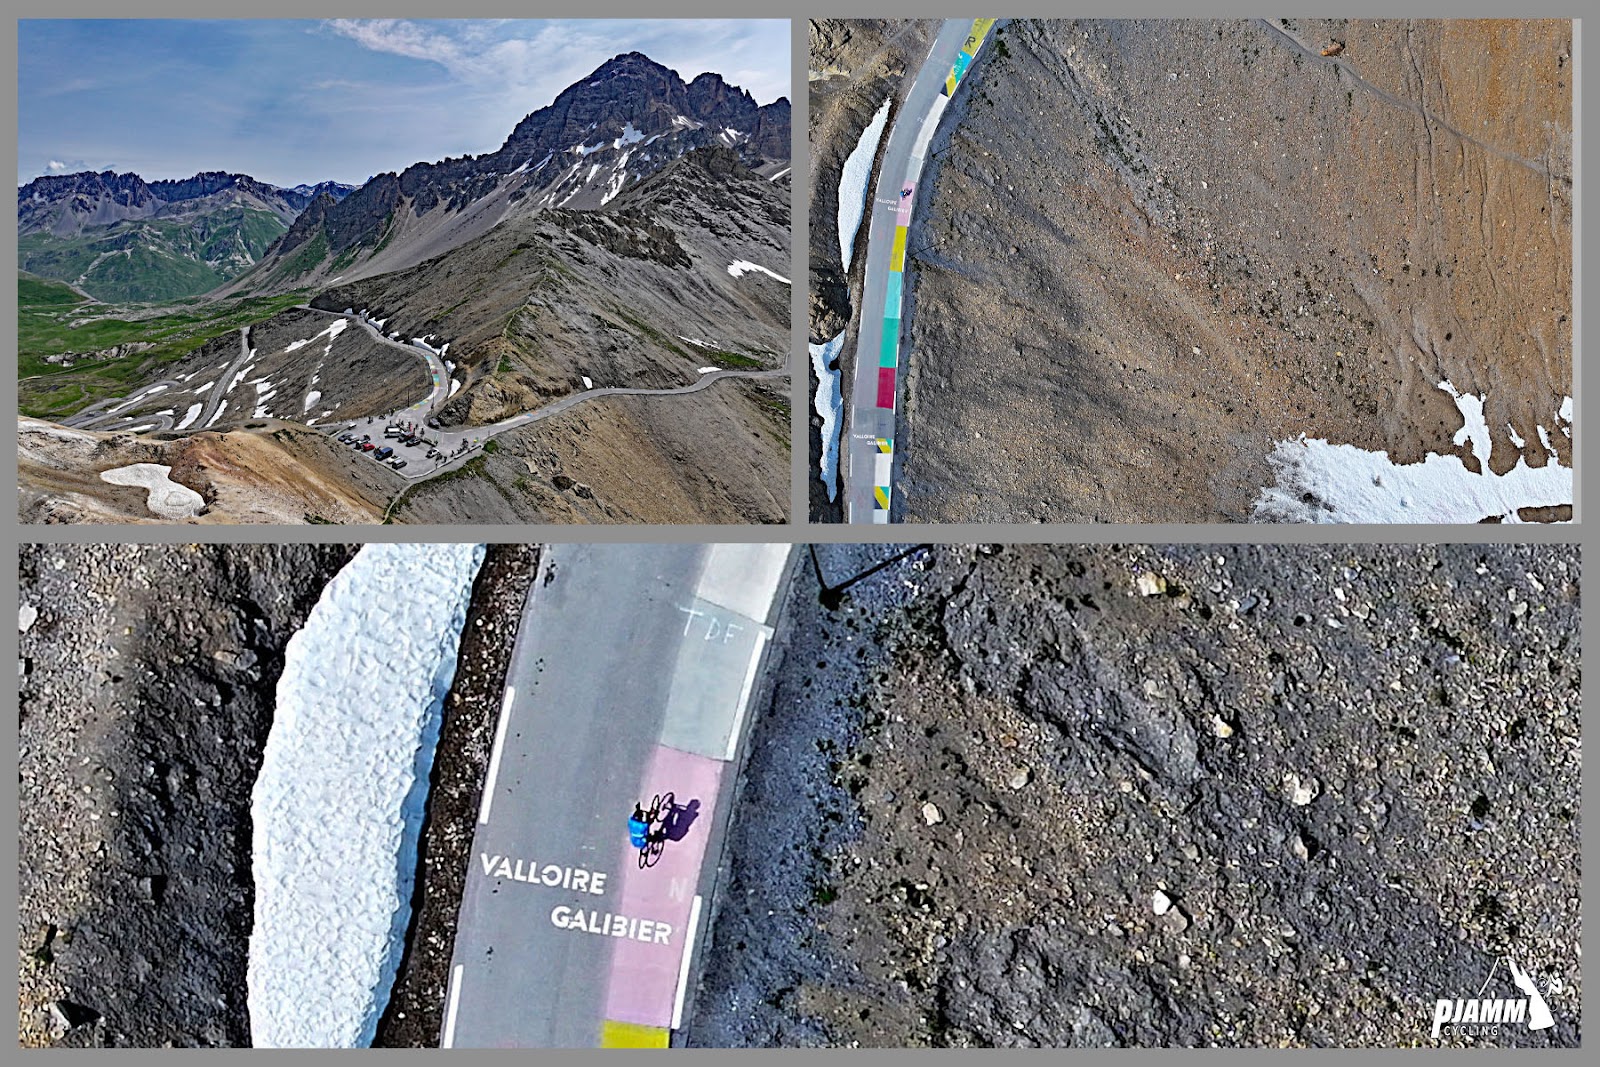 Cycling Col du Galibier from Valloire: aerial drone view shows final 50 meters of climb, roadside painted with colorful blocks, remnants of Tour de France